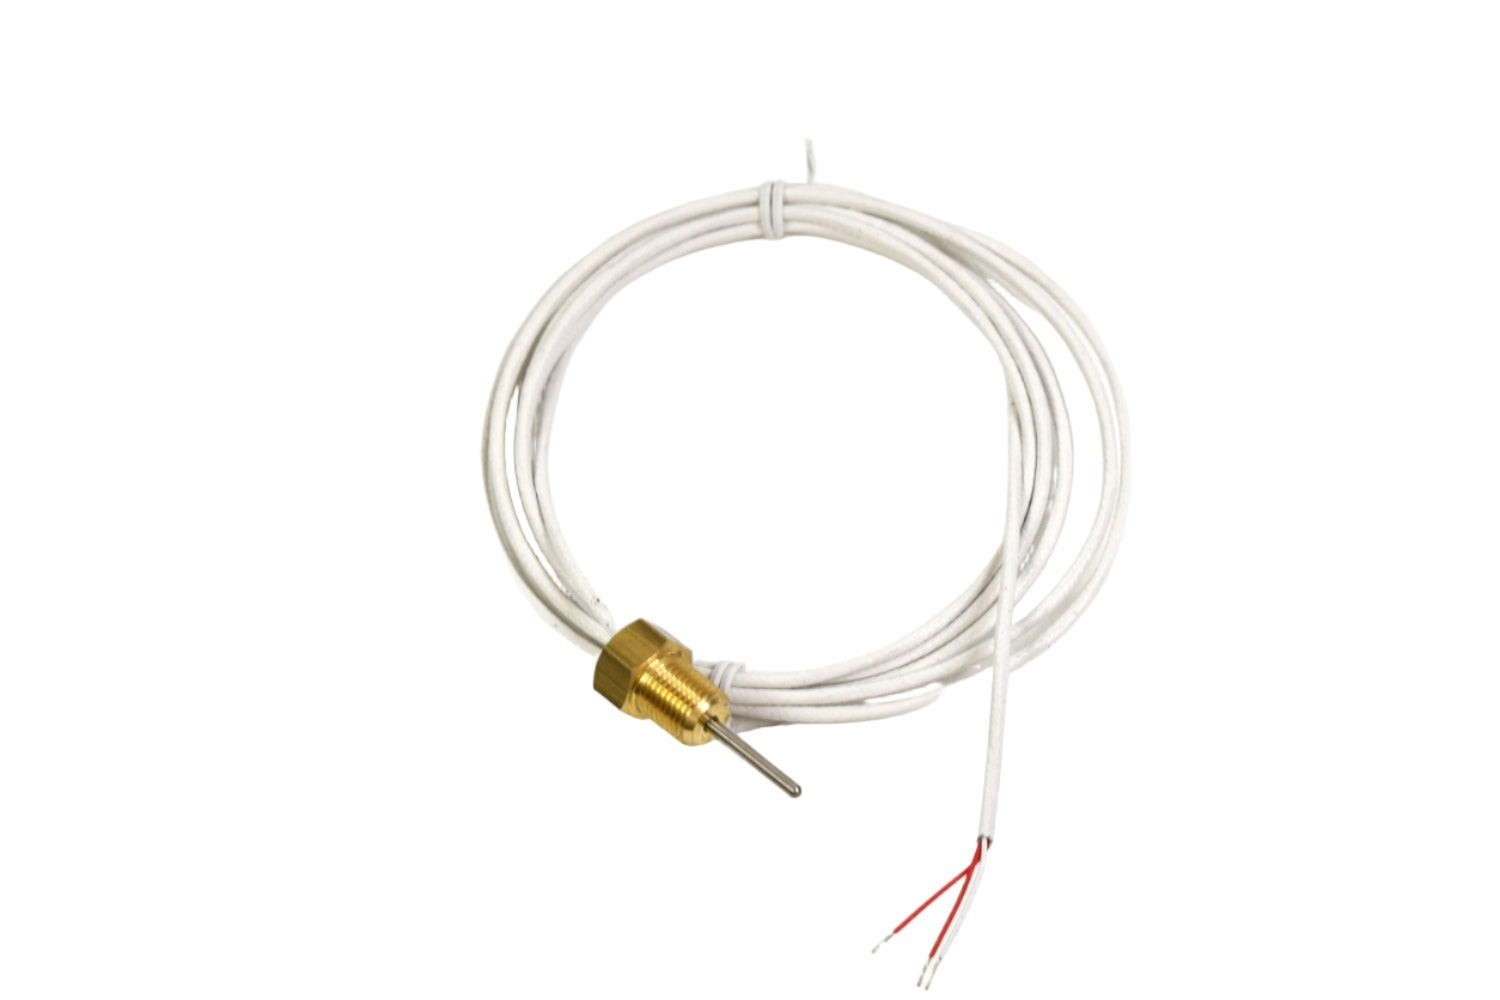 ThermoProbe Replacement Probes